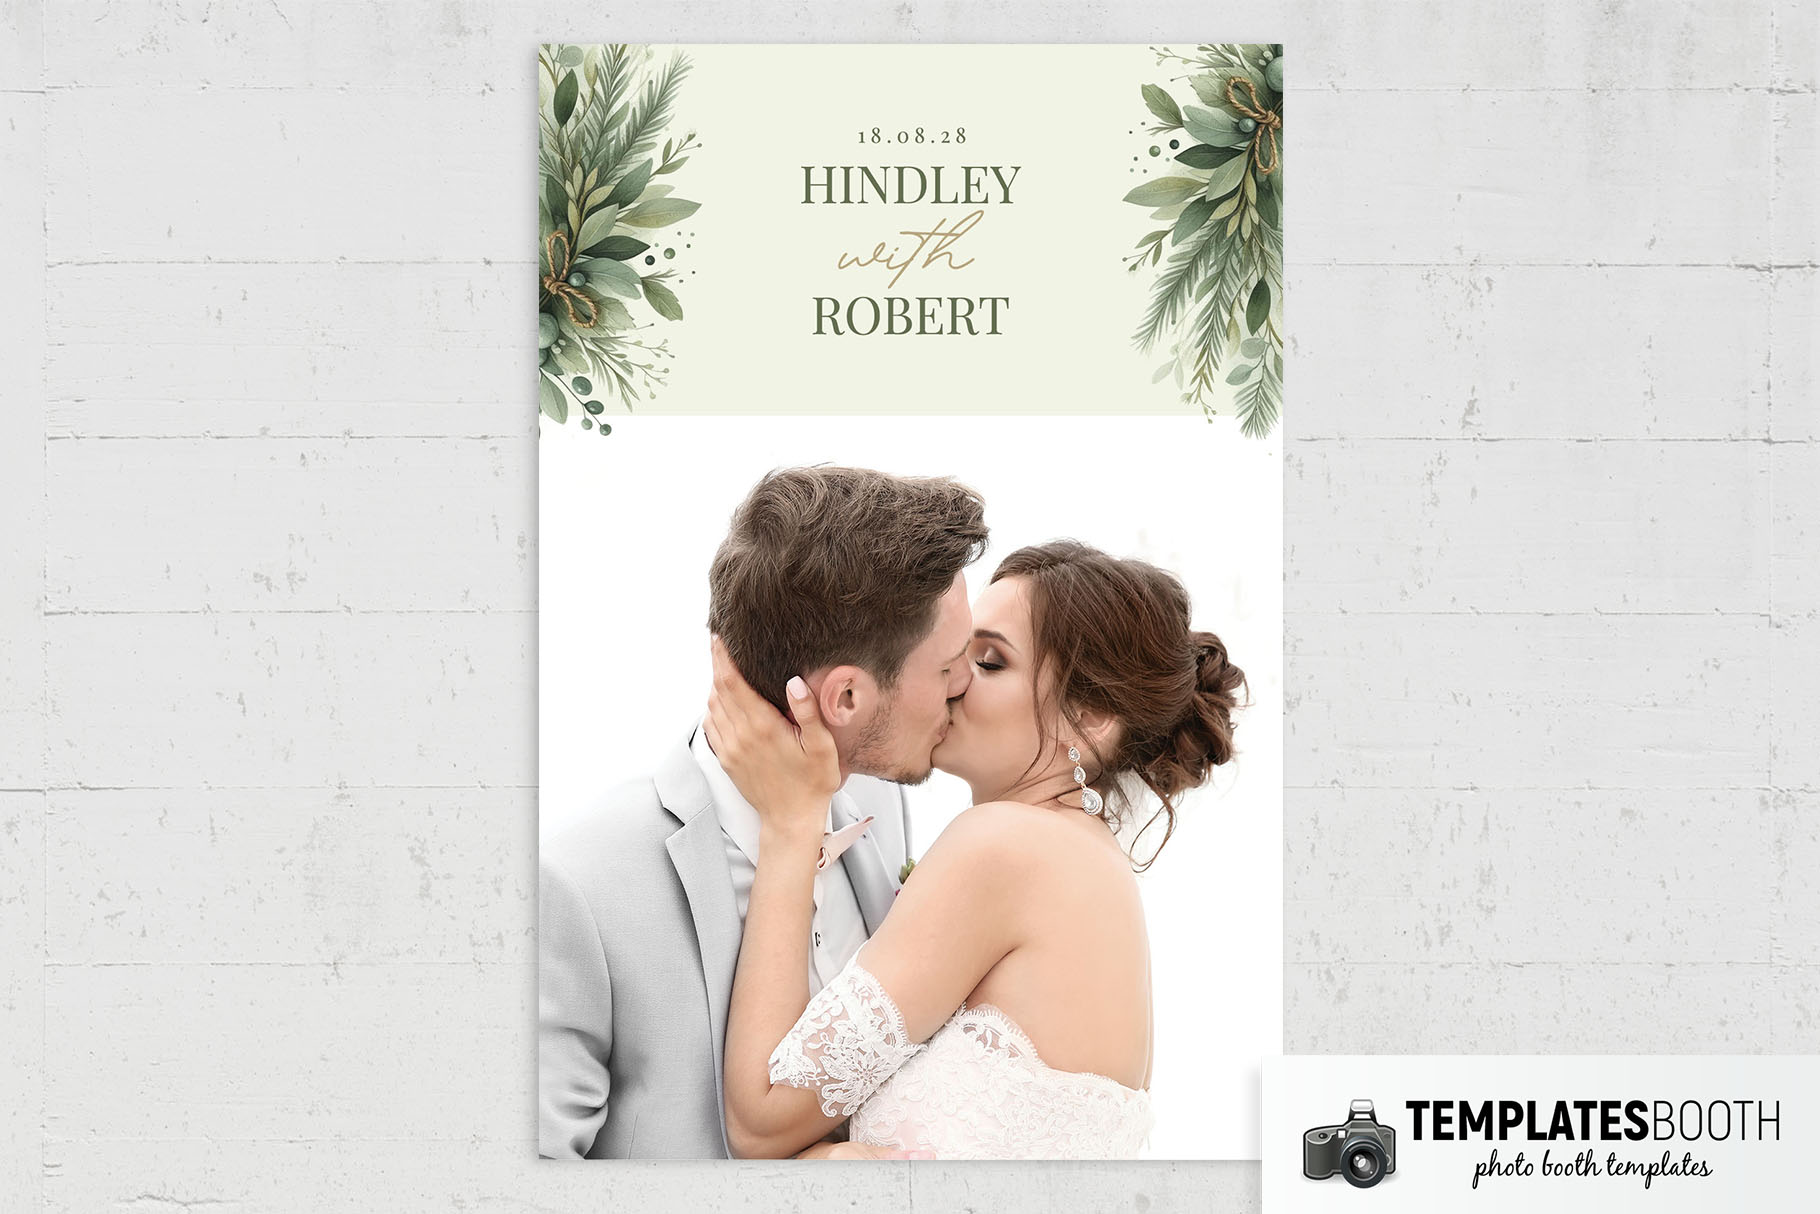 Rustic Green Photo Booth Template